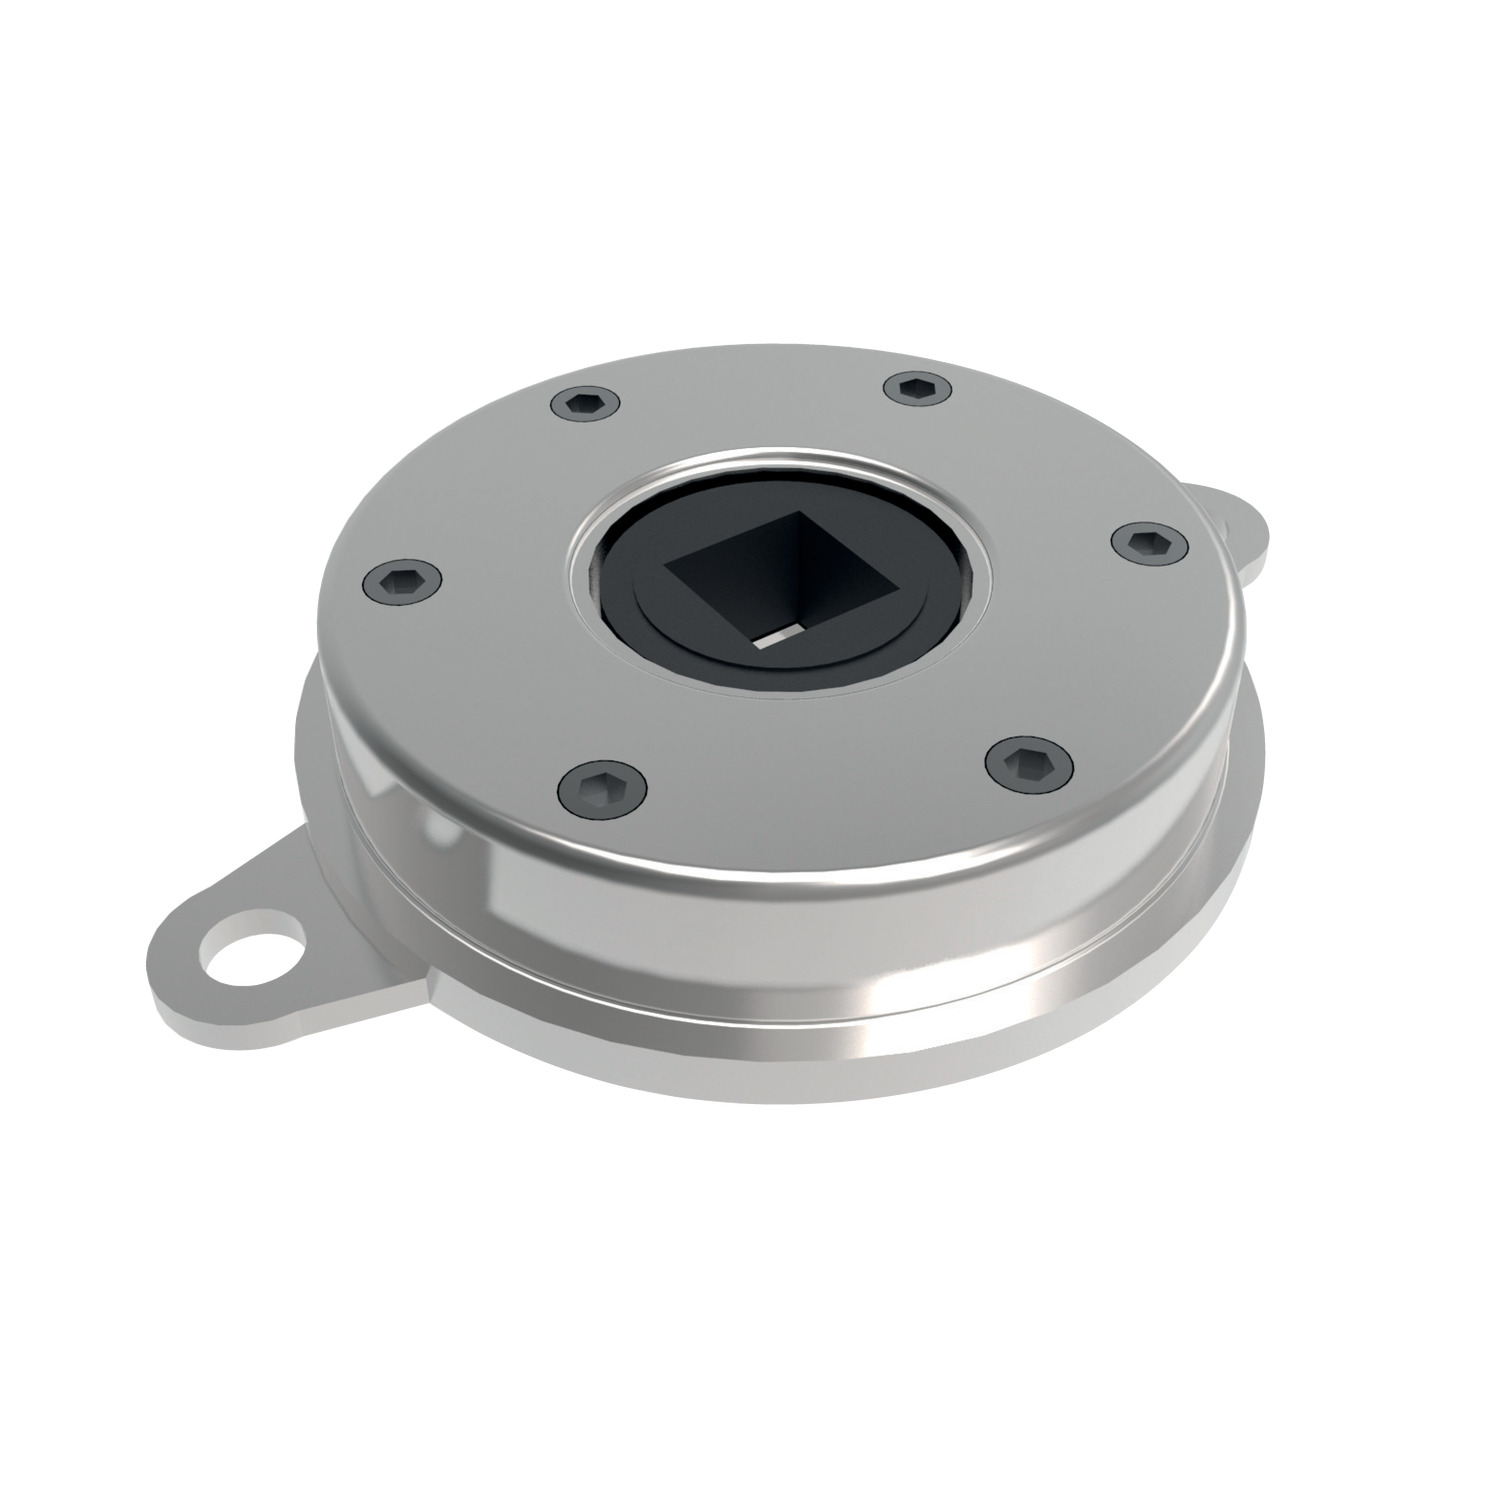 Disk Dampers Steel bodied disk dampers capable of continuous rotation in either clockwise or counter clockwise motions. Supports up to 87 Kgf.cm.